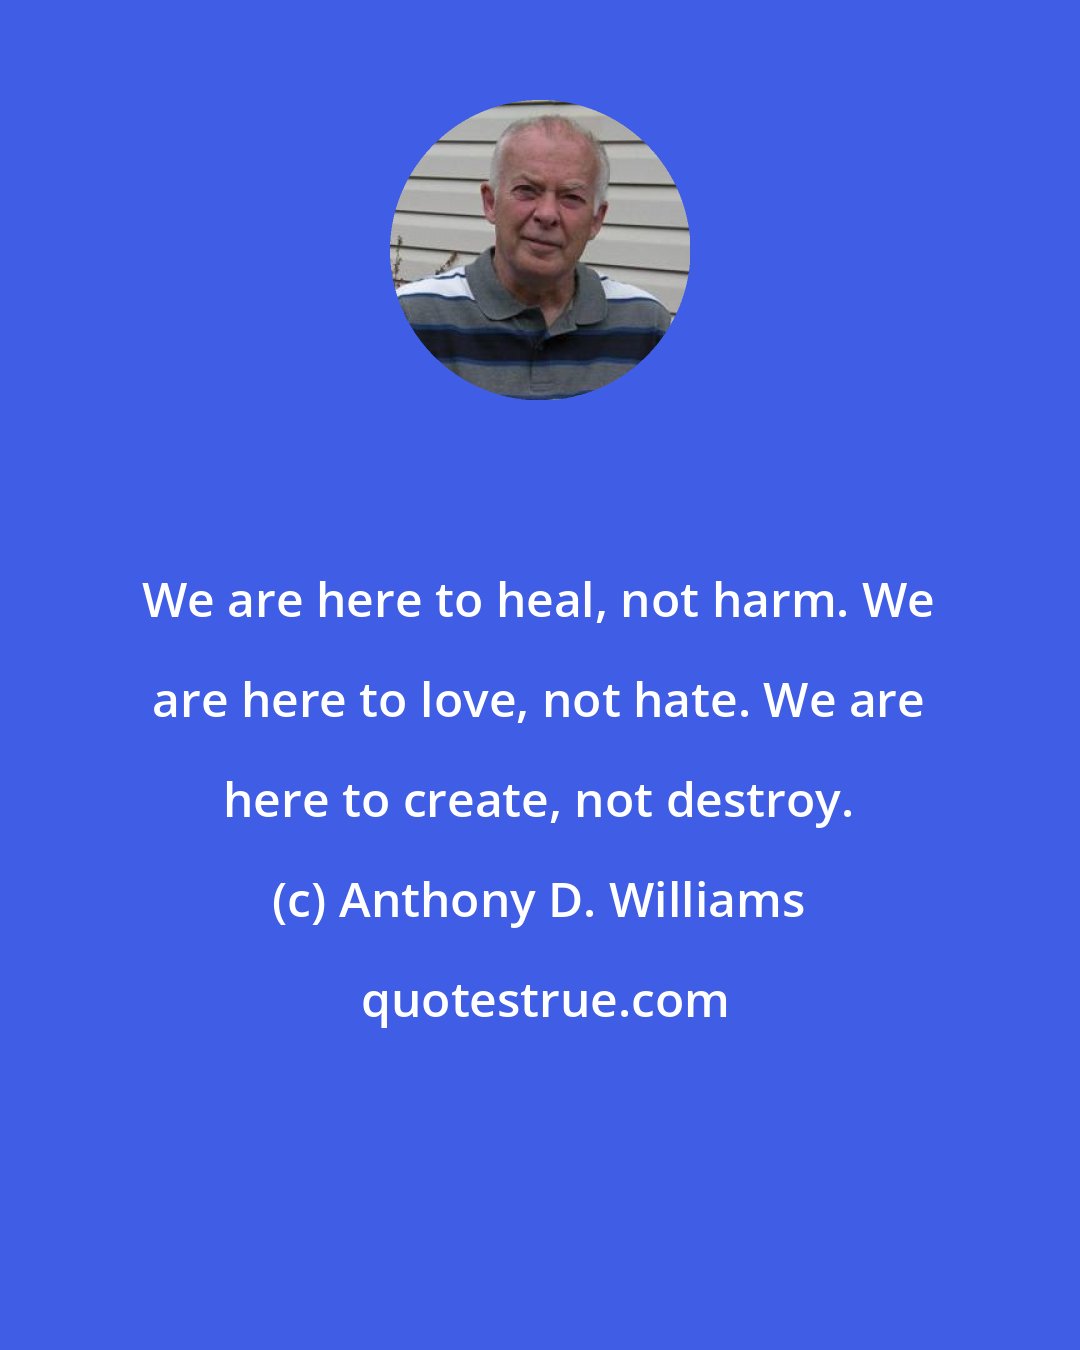 Anthony D. Williams: We are here to heal, not harm. We are here to love, not hate. We are here to create, not destroy.